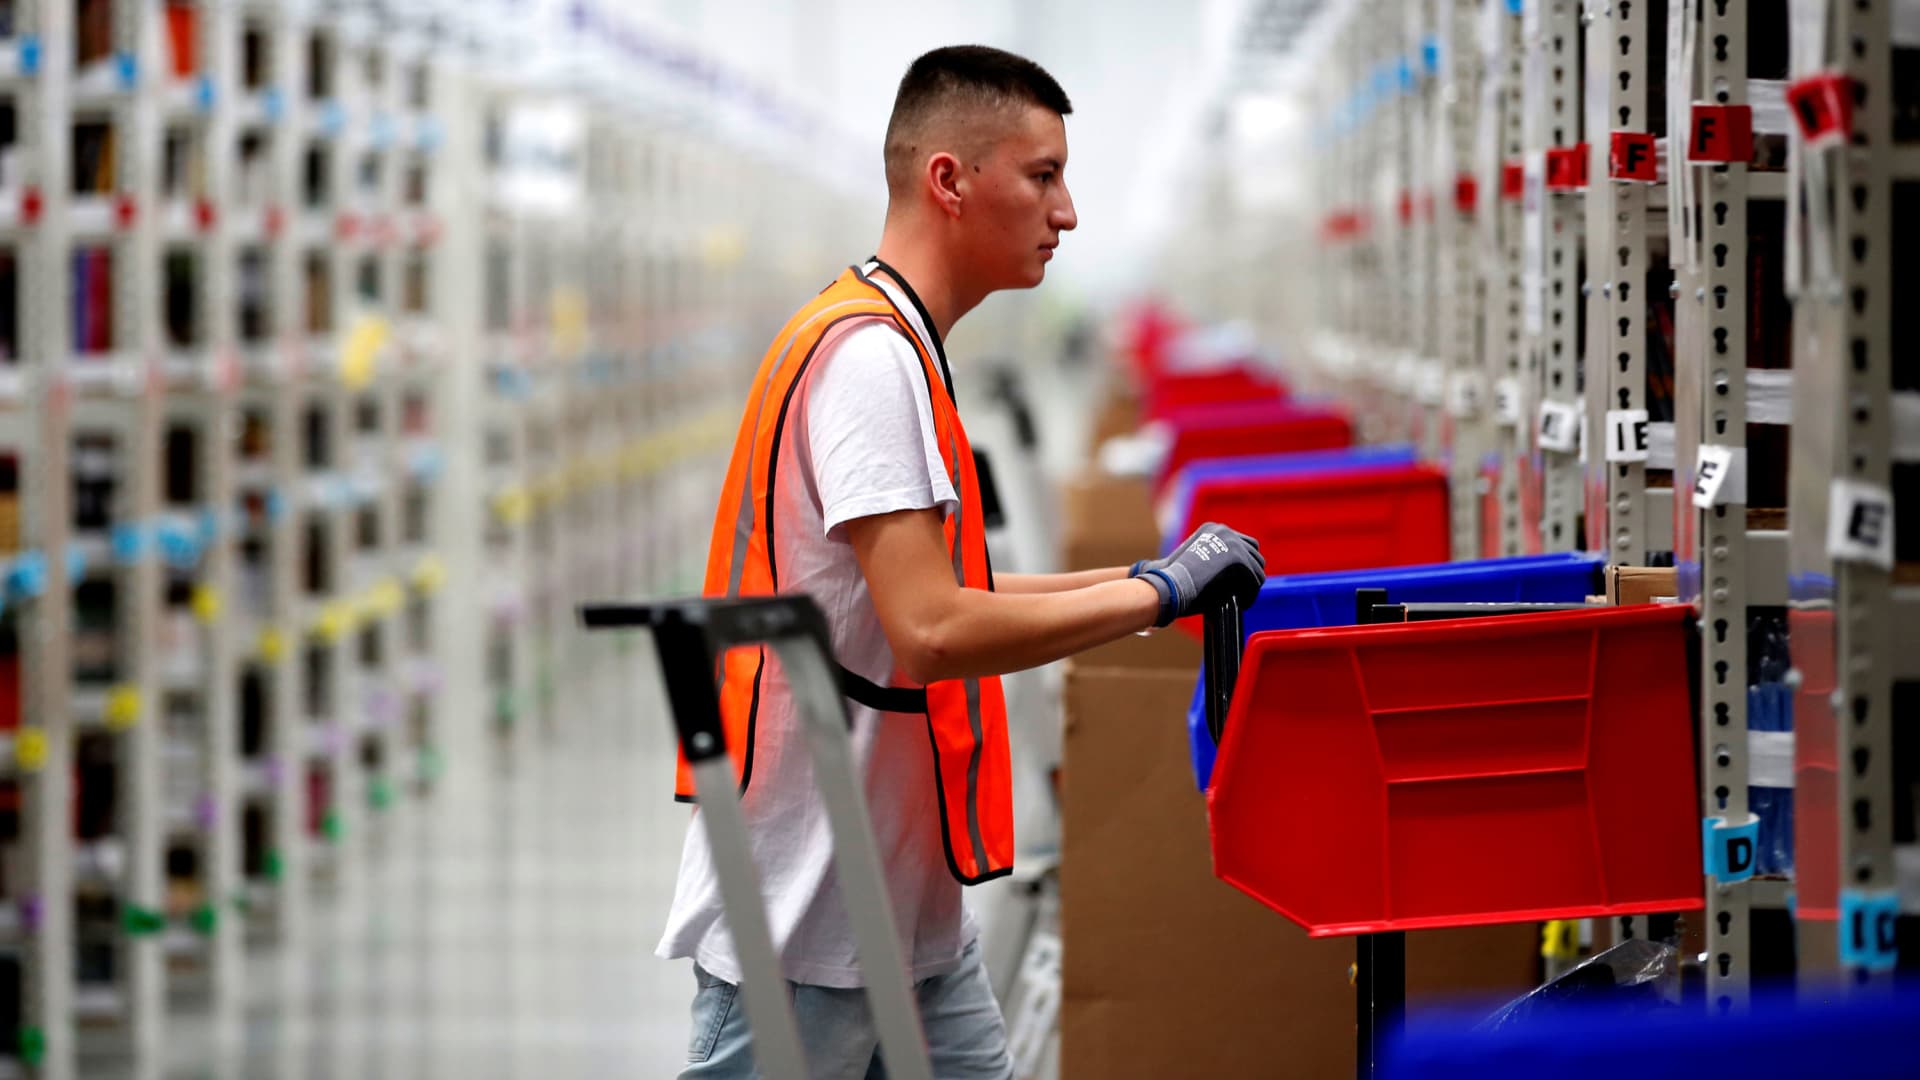 An employee looks for items in one of the corridors at an Amazon warehouse.